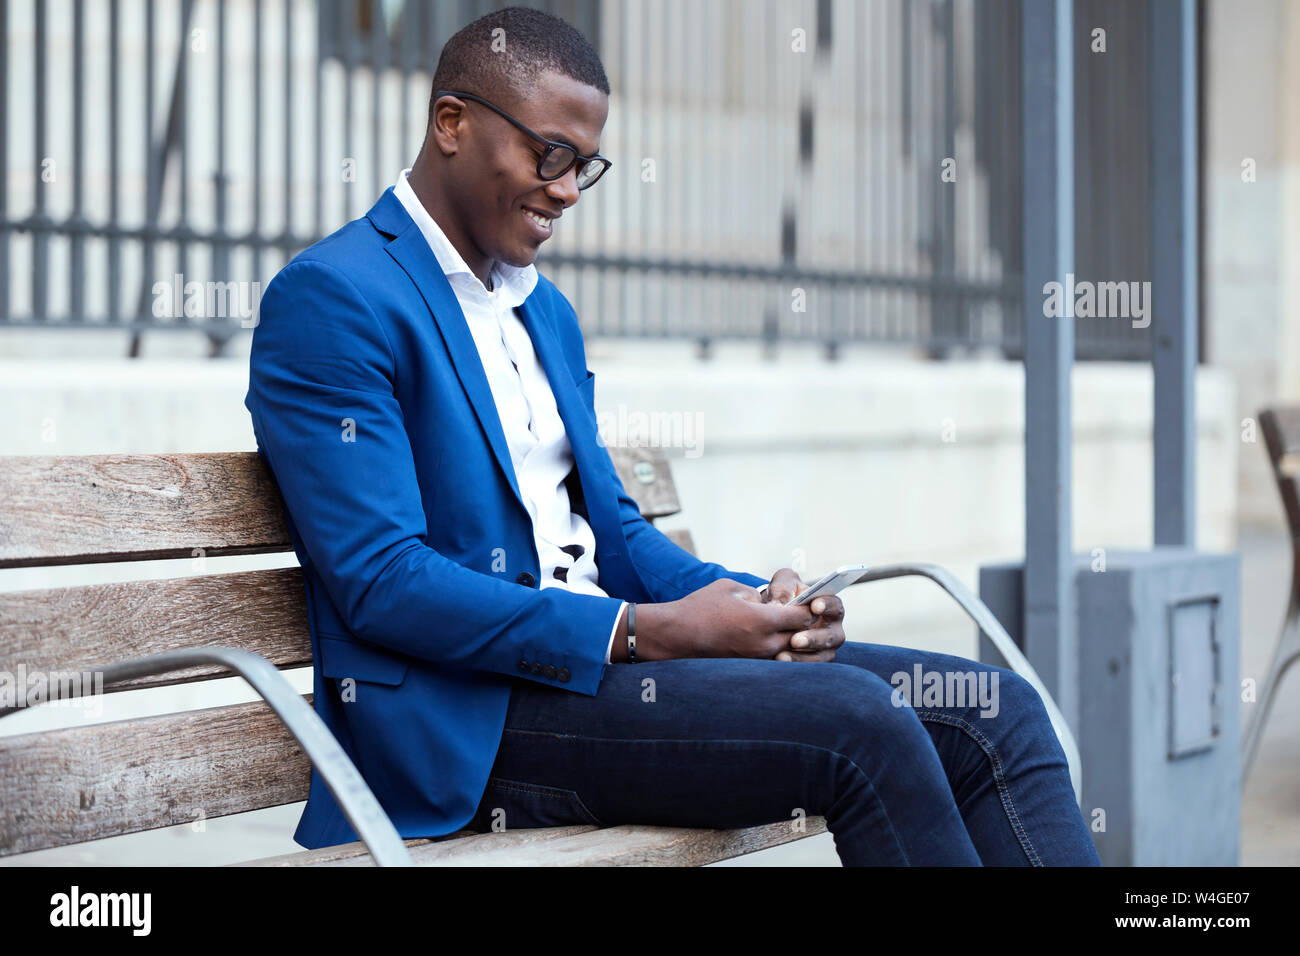 Young businessman wearing blue suit jacket sitting on bench and using smartphone Stock Photo